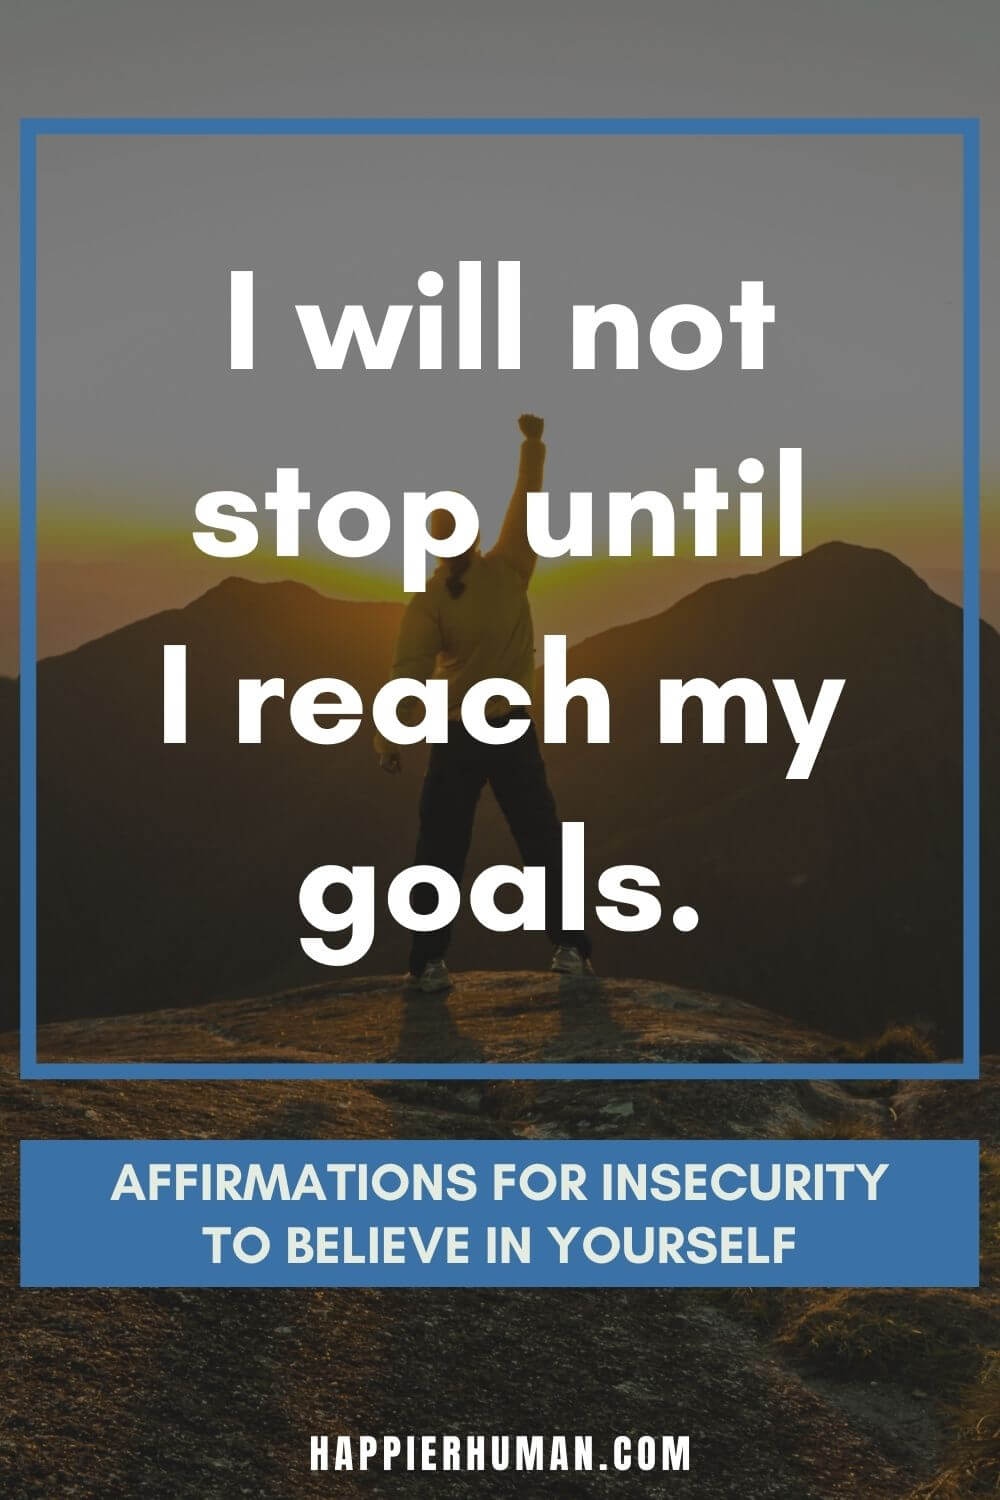 Affirmations for Insecurity - I will not stop until I reach my goals. | affirmations to feel secure | affirmations for feeling inferior | positive affirmations for relationship problems